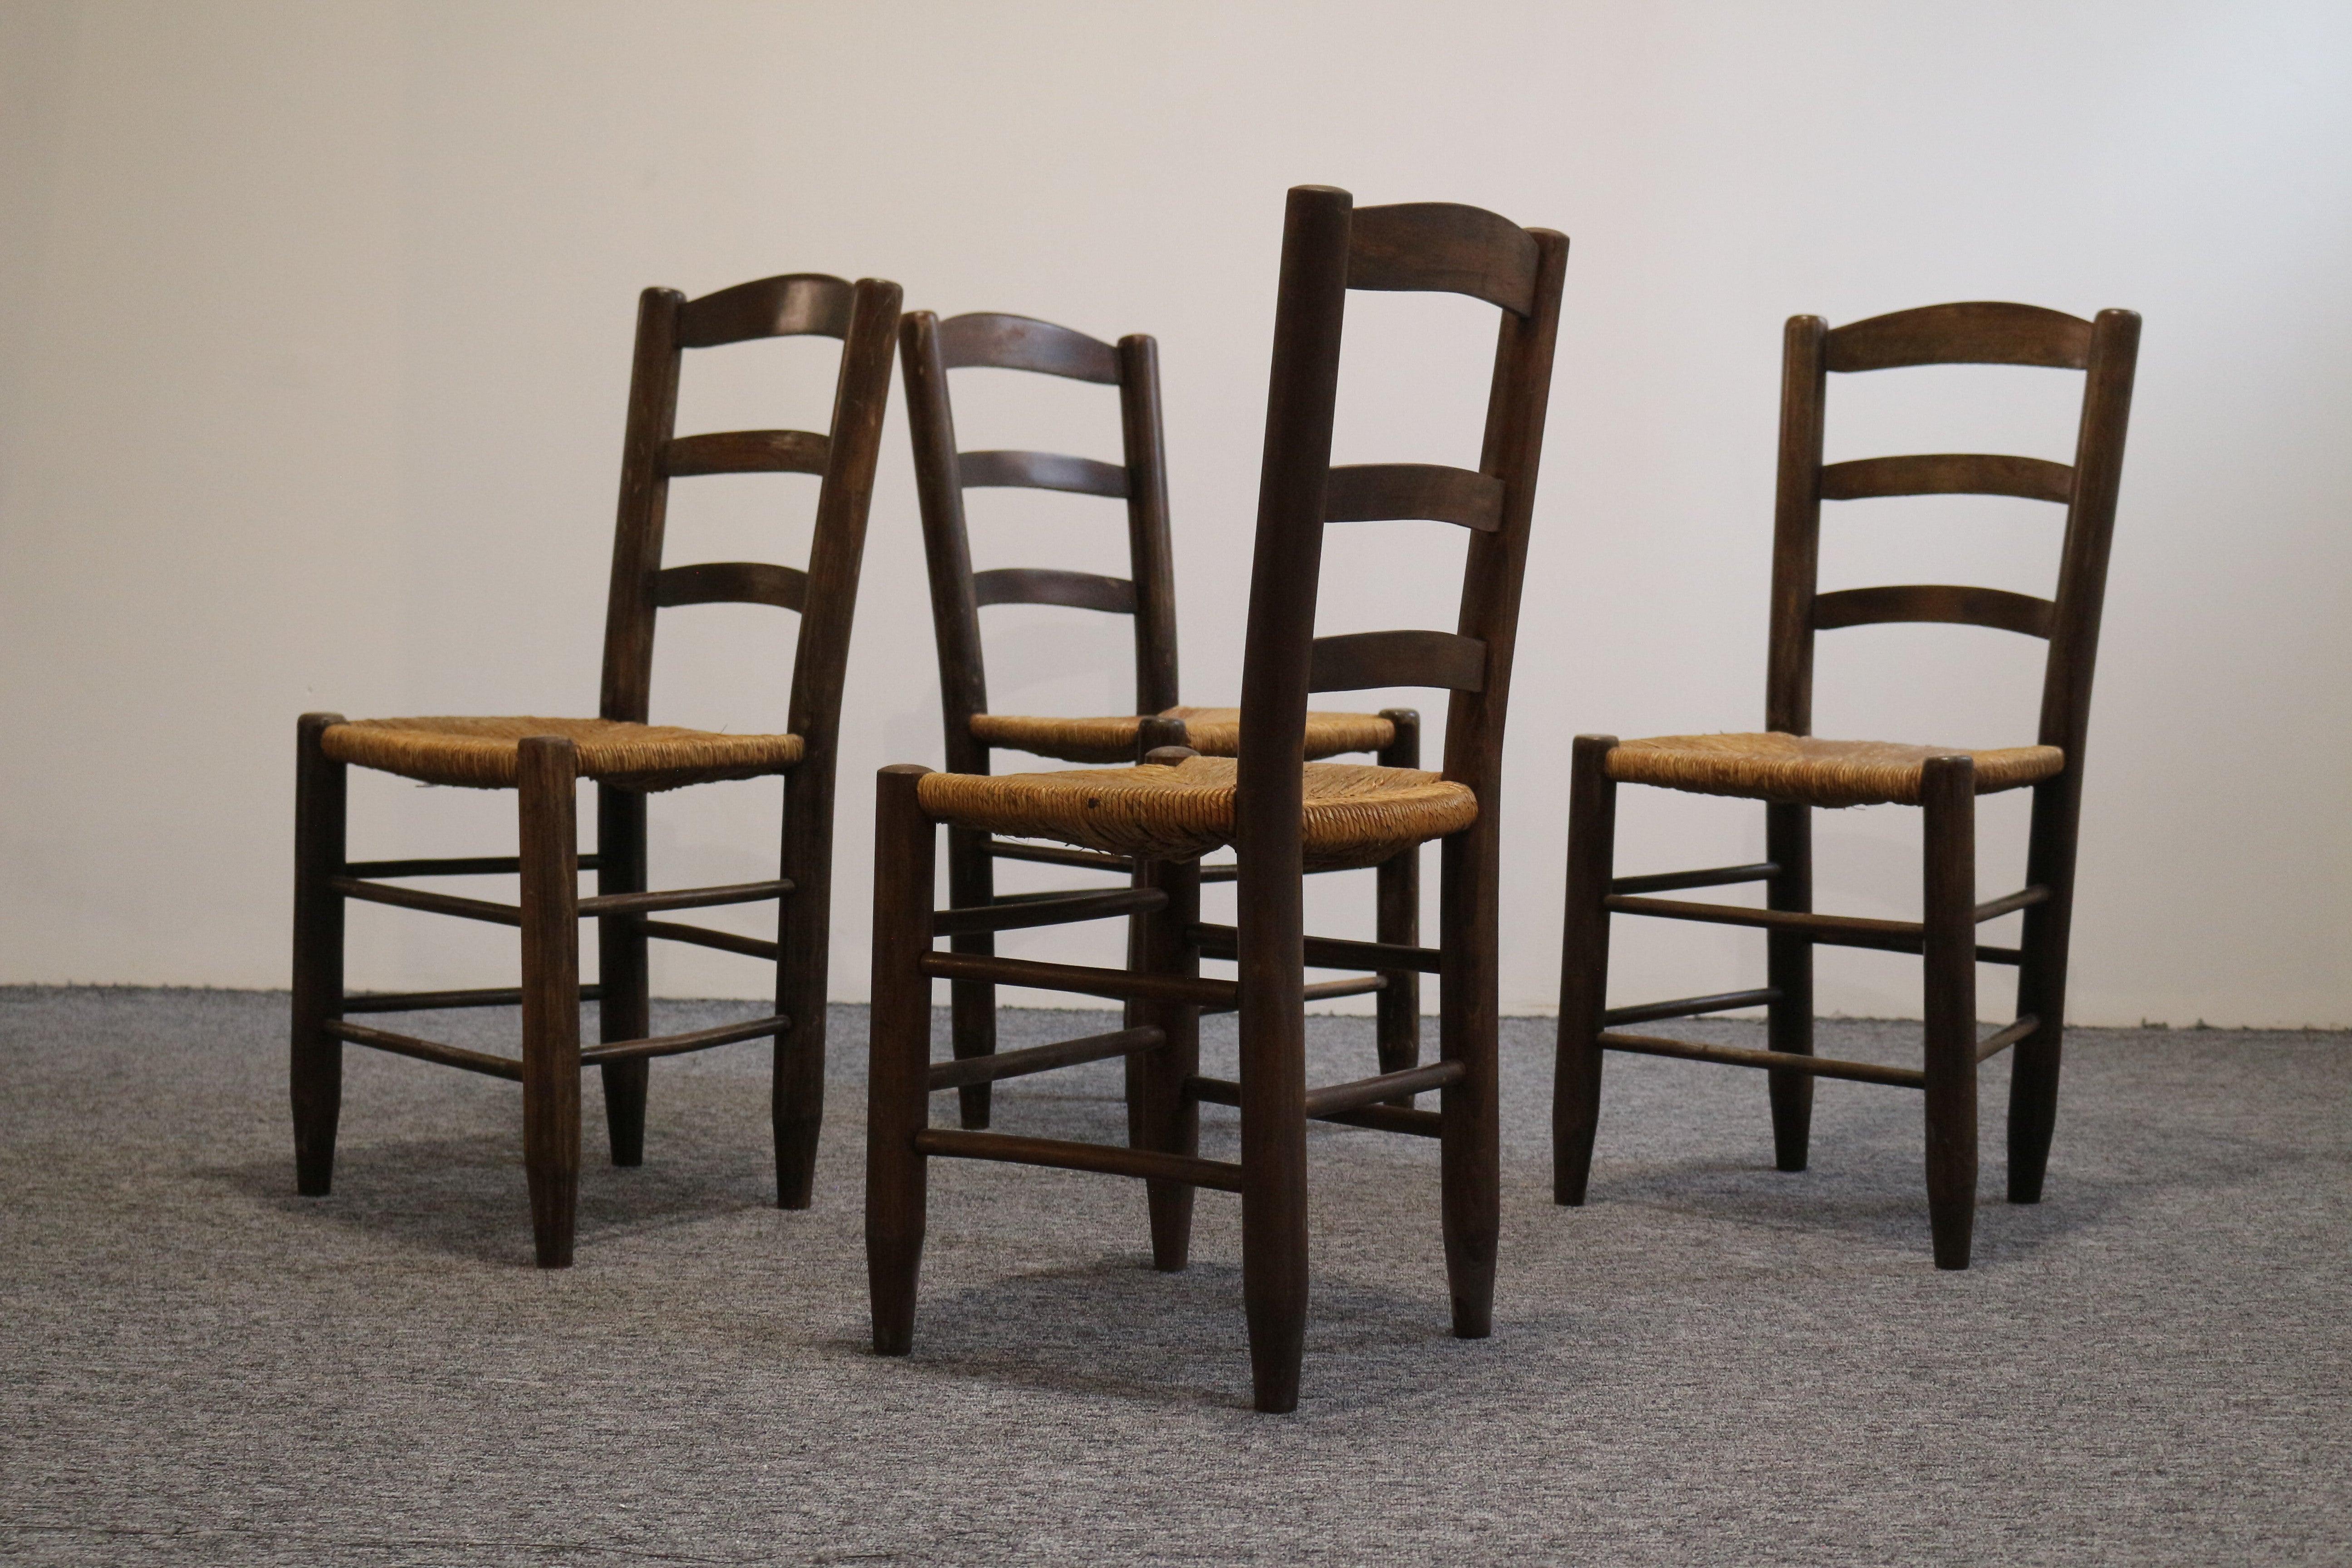 Set 4 chairs assigned to Charlotte Perriand
France, circa 1960.
Very good and original condition.